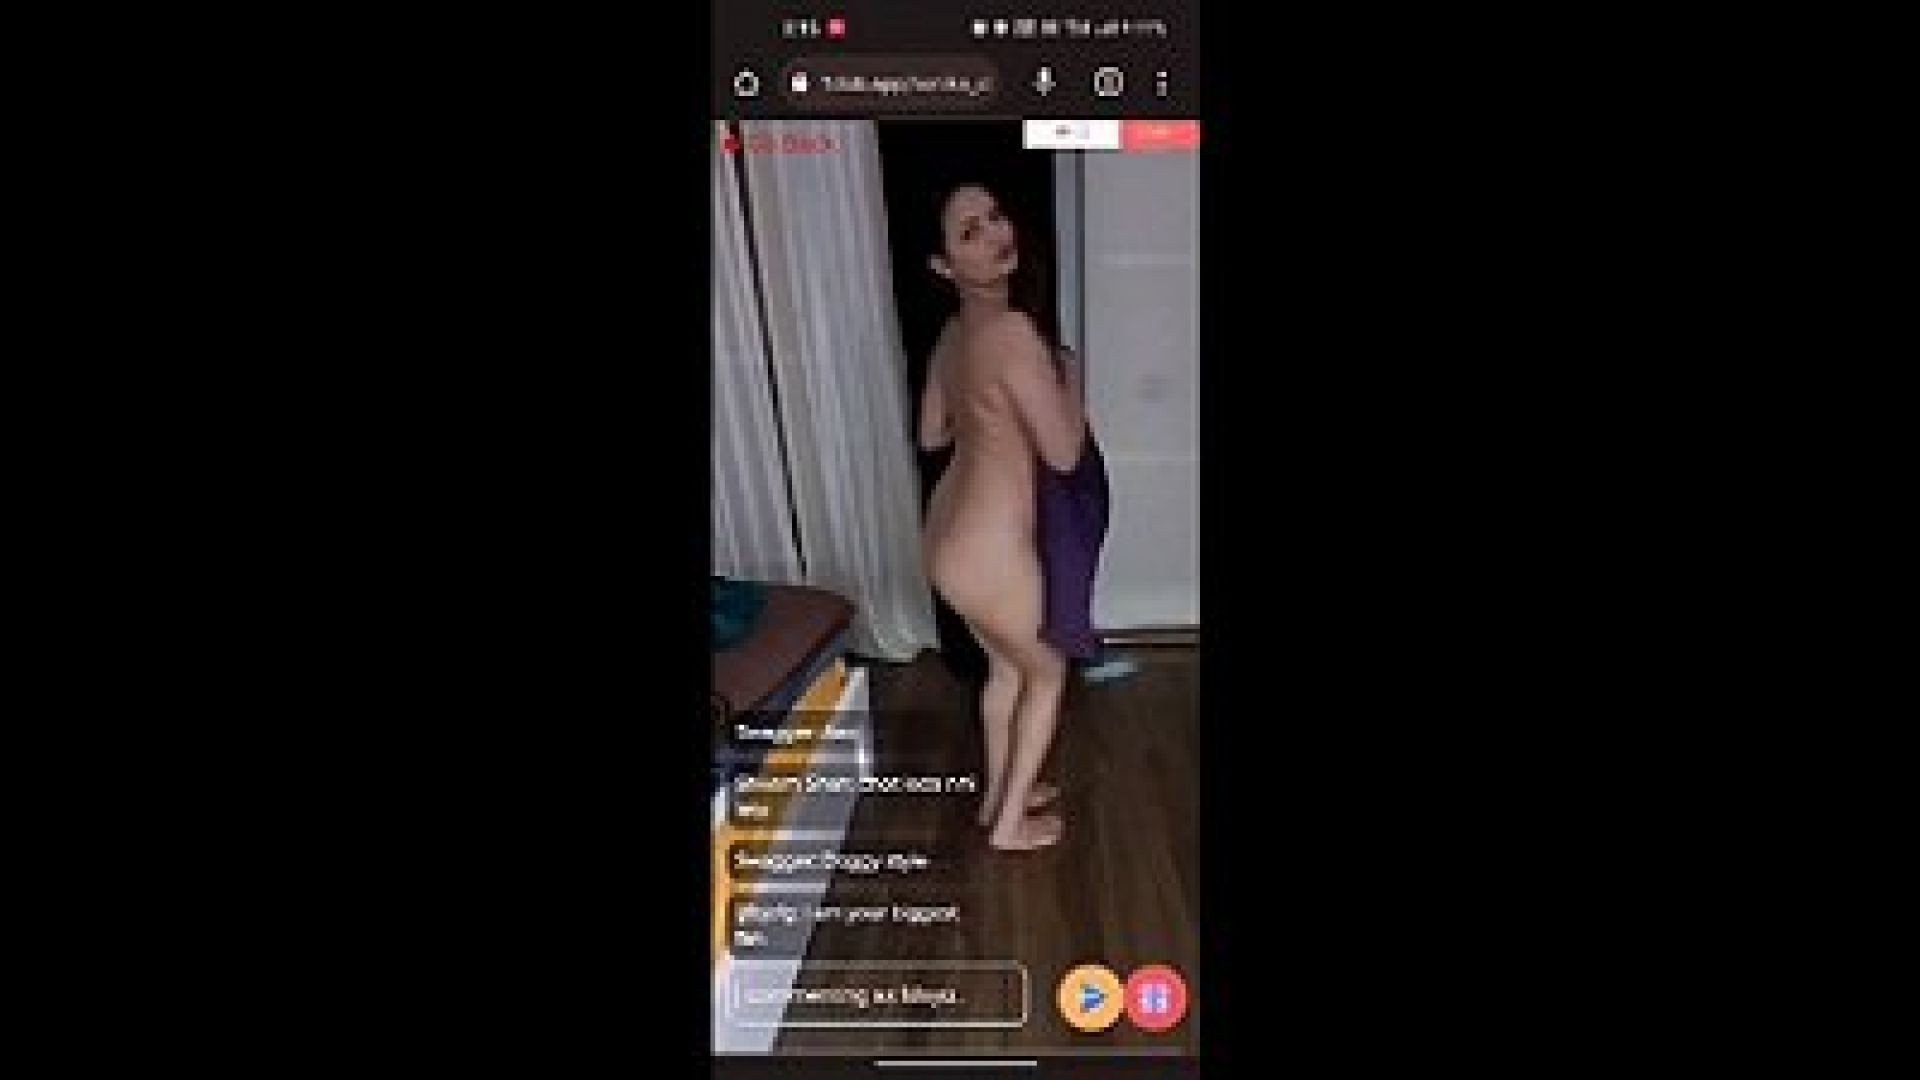 Sonika Chandigarh Showing Ass & Hint of Pussy on Exclusive App Live ~ MUST WATCH